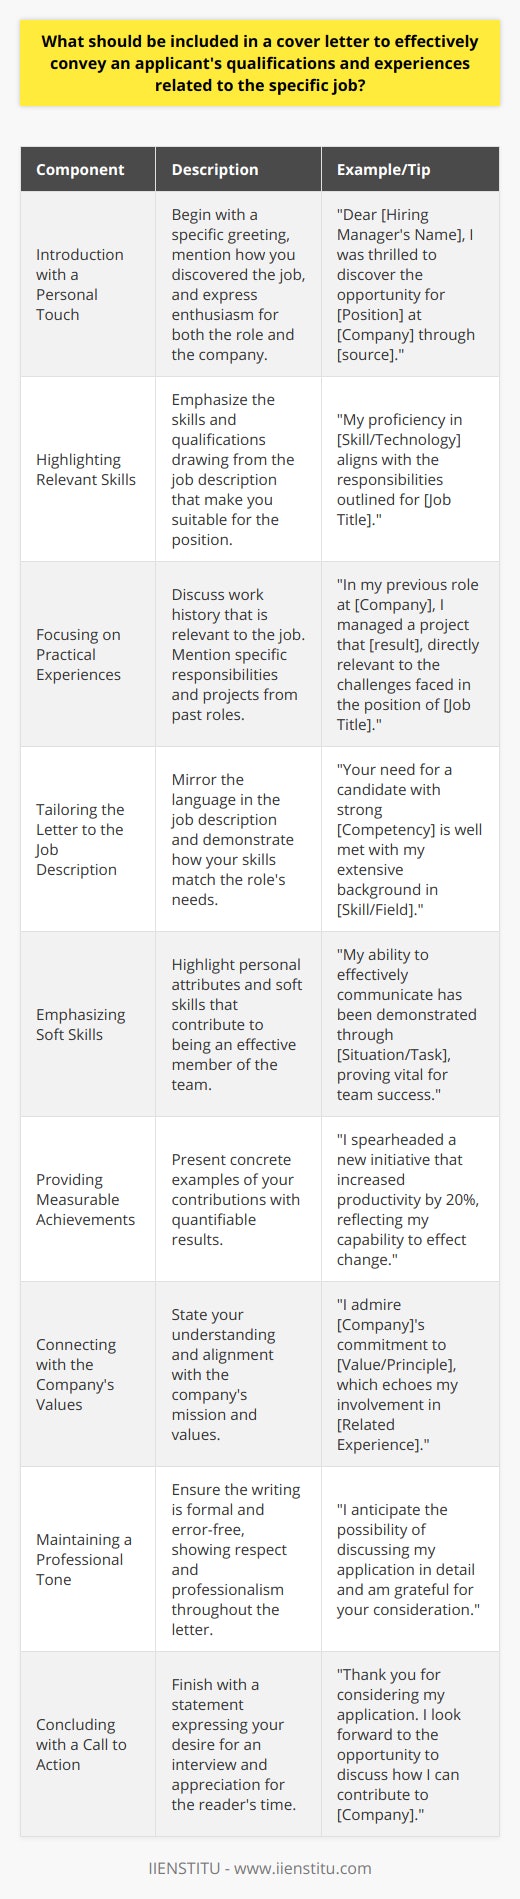 A well-constructed cover letter serves as a critical introduction to a potential employer, offering a glimpse into an applicant’s professional background and suitability for a job. To craft an effective cover letter, one must include various elements that collectively convey the multifaceted nature of the applicant. Here is a guide on what should be included in a cover letter to effectively communicate an applicant's qualifications and experiences related to a specific job.1. **Introduction with a Personal Touch:** Begin with a professional greeting and a personalized introduction. Mention how you learned about the job opportunity and express your enthusiasm for the position and the company. A touch of personalization shows that the letter isn't generic but specifically intended for the company and role.2. **Highlighting Relevant Skills and Qualifications:** It's crucial to discuss the key skills and qualifications that make you well-suited for the position. Place special emphasis on the abilities that match the job description. This may include industry-specific knowledge, technology proficiency, language skills, and any specialized academic accomplishments or certifications relevant to the role.3. **Focusing on Practical Experiences:** Elaborate on your work history by discussing specific roles and the responsibilities that align with the open position. Detail how your previous positions have prepared you to take on the new role. Mention practical experiences such as successful projects managed, challenging situations handled, or collaborations that led to significant outcomes.4. **Tailoring the Letter to the Job Description:** One effective strategy is to mirror the language found in the job description. Identify the key competencies sought by the employer and illustrate how your skillset responds to those needs. This demonstrates that you have read the job posting carefully and understand what the role entails.5. **Emphasizing Soft Skills:** Soft skills are often what set candidates apart. The ability to communicate effectively, show leadership, work as part of a team, adapt to new situations, and maintain professionalism under pressure are all valuable assets to any employer. Give instances where your soft skills have played a crucial role in your successes.6. **Providing Measurable Achievements:** Concrete achievements, backed by numbers or concrete outcomes, can make a strong statement about your capabilities. For example, rather than saying you improved sales, quantify it by stating that you increased sales by 25% over six months. Such metrics provide tangible evidence of your impact in previous roles.7. **Connecting with the Company's Values:** Companies appreciate candidates who demonstrate a genuine interest and alignment with their culture and values. Research the company and mention how you resonate with their core principles or missions. This can involve highlighting your involvement in community service if the company values social responsibility, for example.8. **Maintaining a Professional Tone:** It is imperative to compose your cover letter with a professional tone. Address the hiring manager or recruitment team respectfully, and take great care in proofreading your letter for any grammatical or typographical errors. Presenting a clean, well-structured letter reflects your professionalism and attention to detail.9. **Concluding with a Call to Action:** End your cover letter with a courteous closing statement, expressing your hope for an interview. Thank the reader for their time and consideration, and include a statement indicating that you look forward to discussing your application further in person.By weaving together these components, your cover letter becomes a purposeful narrative that not only showcases your career path but also underlines your desire and preparedness for the role you're seeking. Remember to keep your letter concise, sticking to the most compelling and pertinent information. When an applicant follows this framework, they increase their chances of making a memorable impression and advancing to the next stage in the recruitment process.